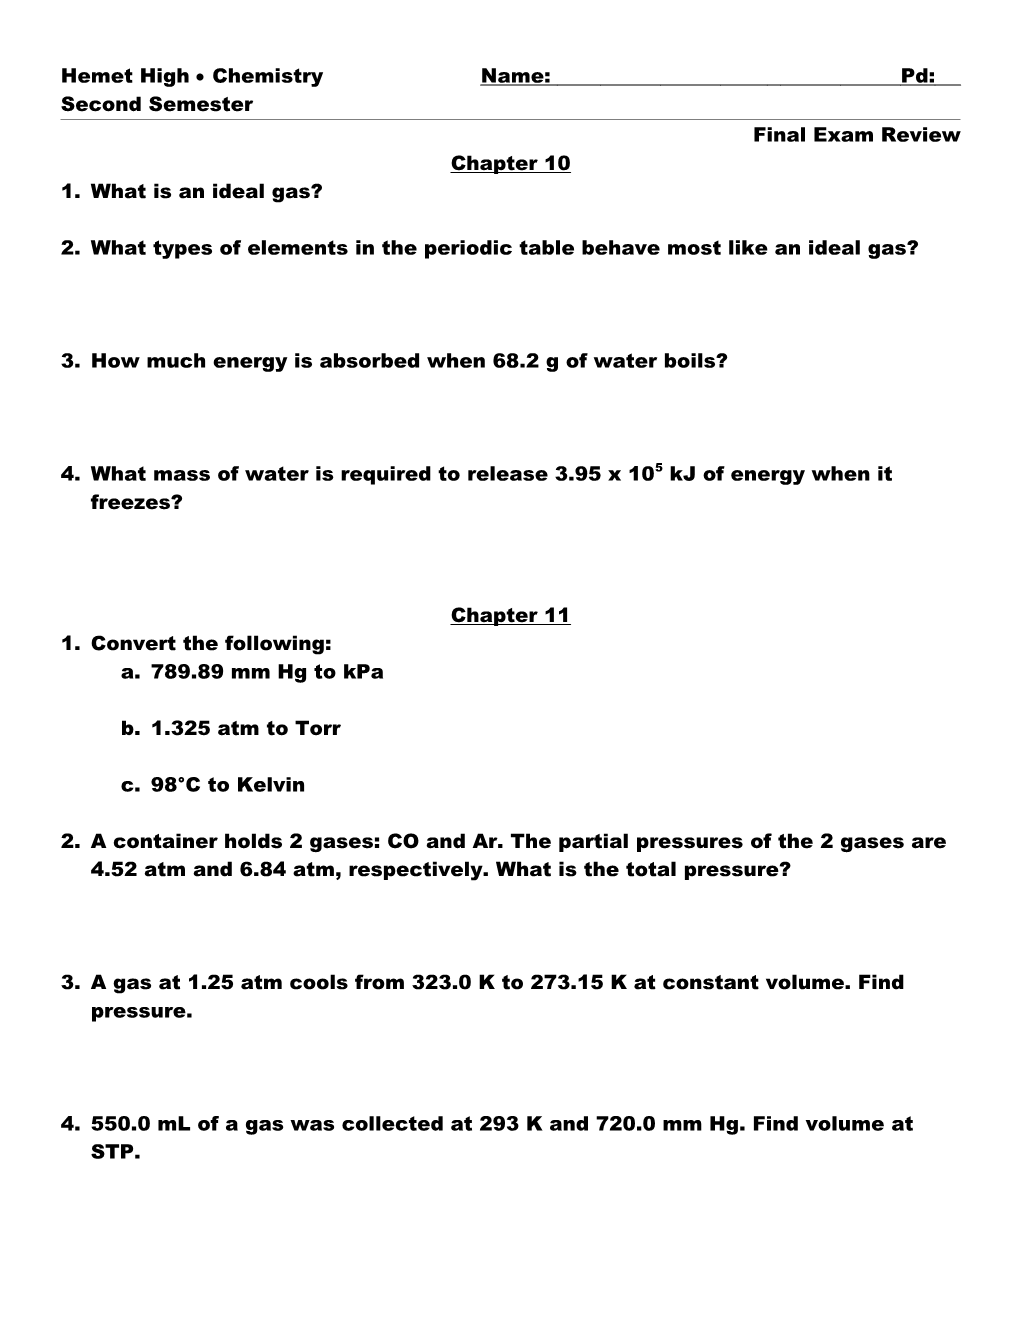 Chapter 10 Chemistry Review